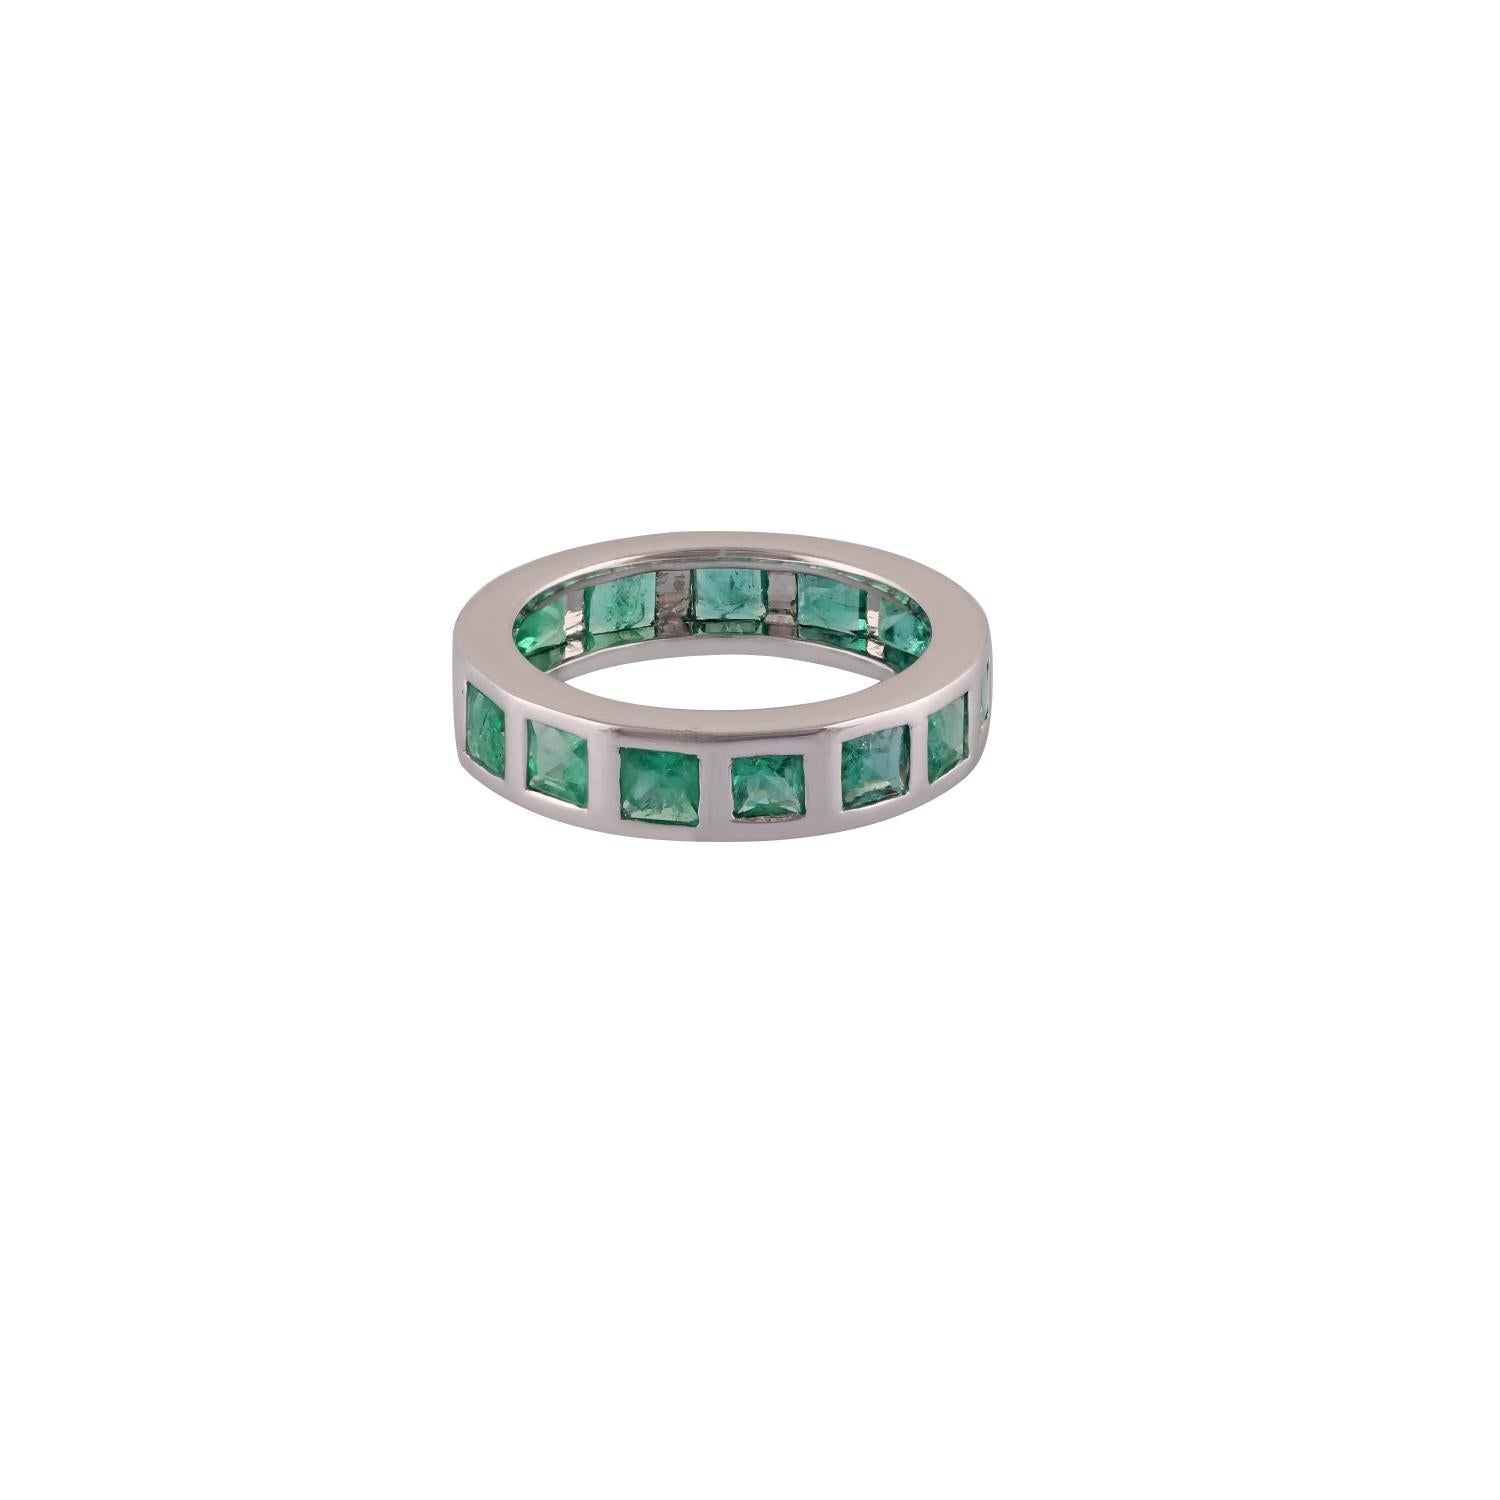 Handcrafted 2.59 Carat Clear Emerald classic Band in 18k White Gold
15 Emerald - 2.59 Cts
18 Karat White Gold
Size - 7us


Custom Services
Resizing is available.
Request Customization